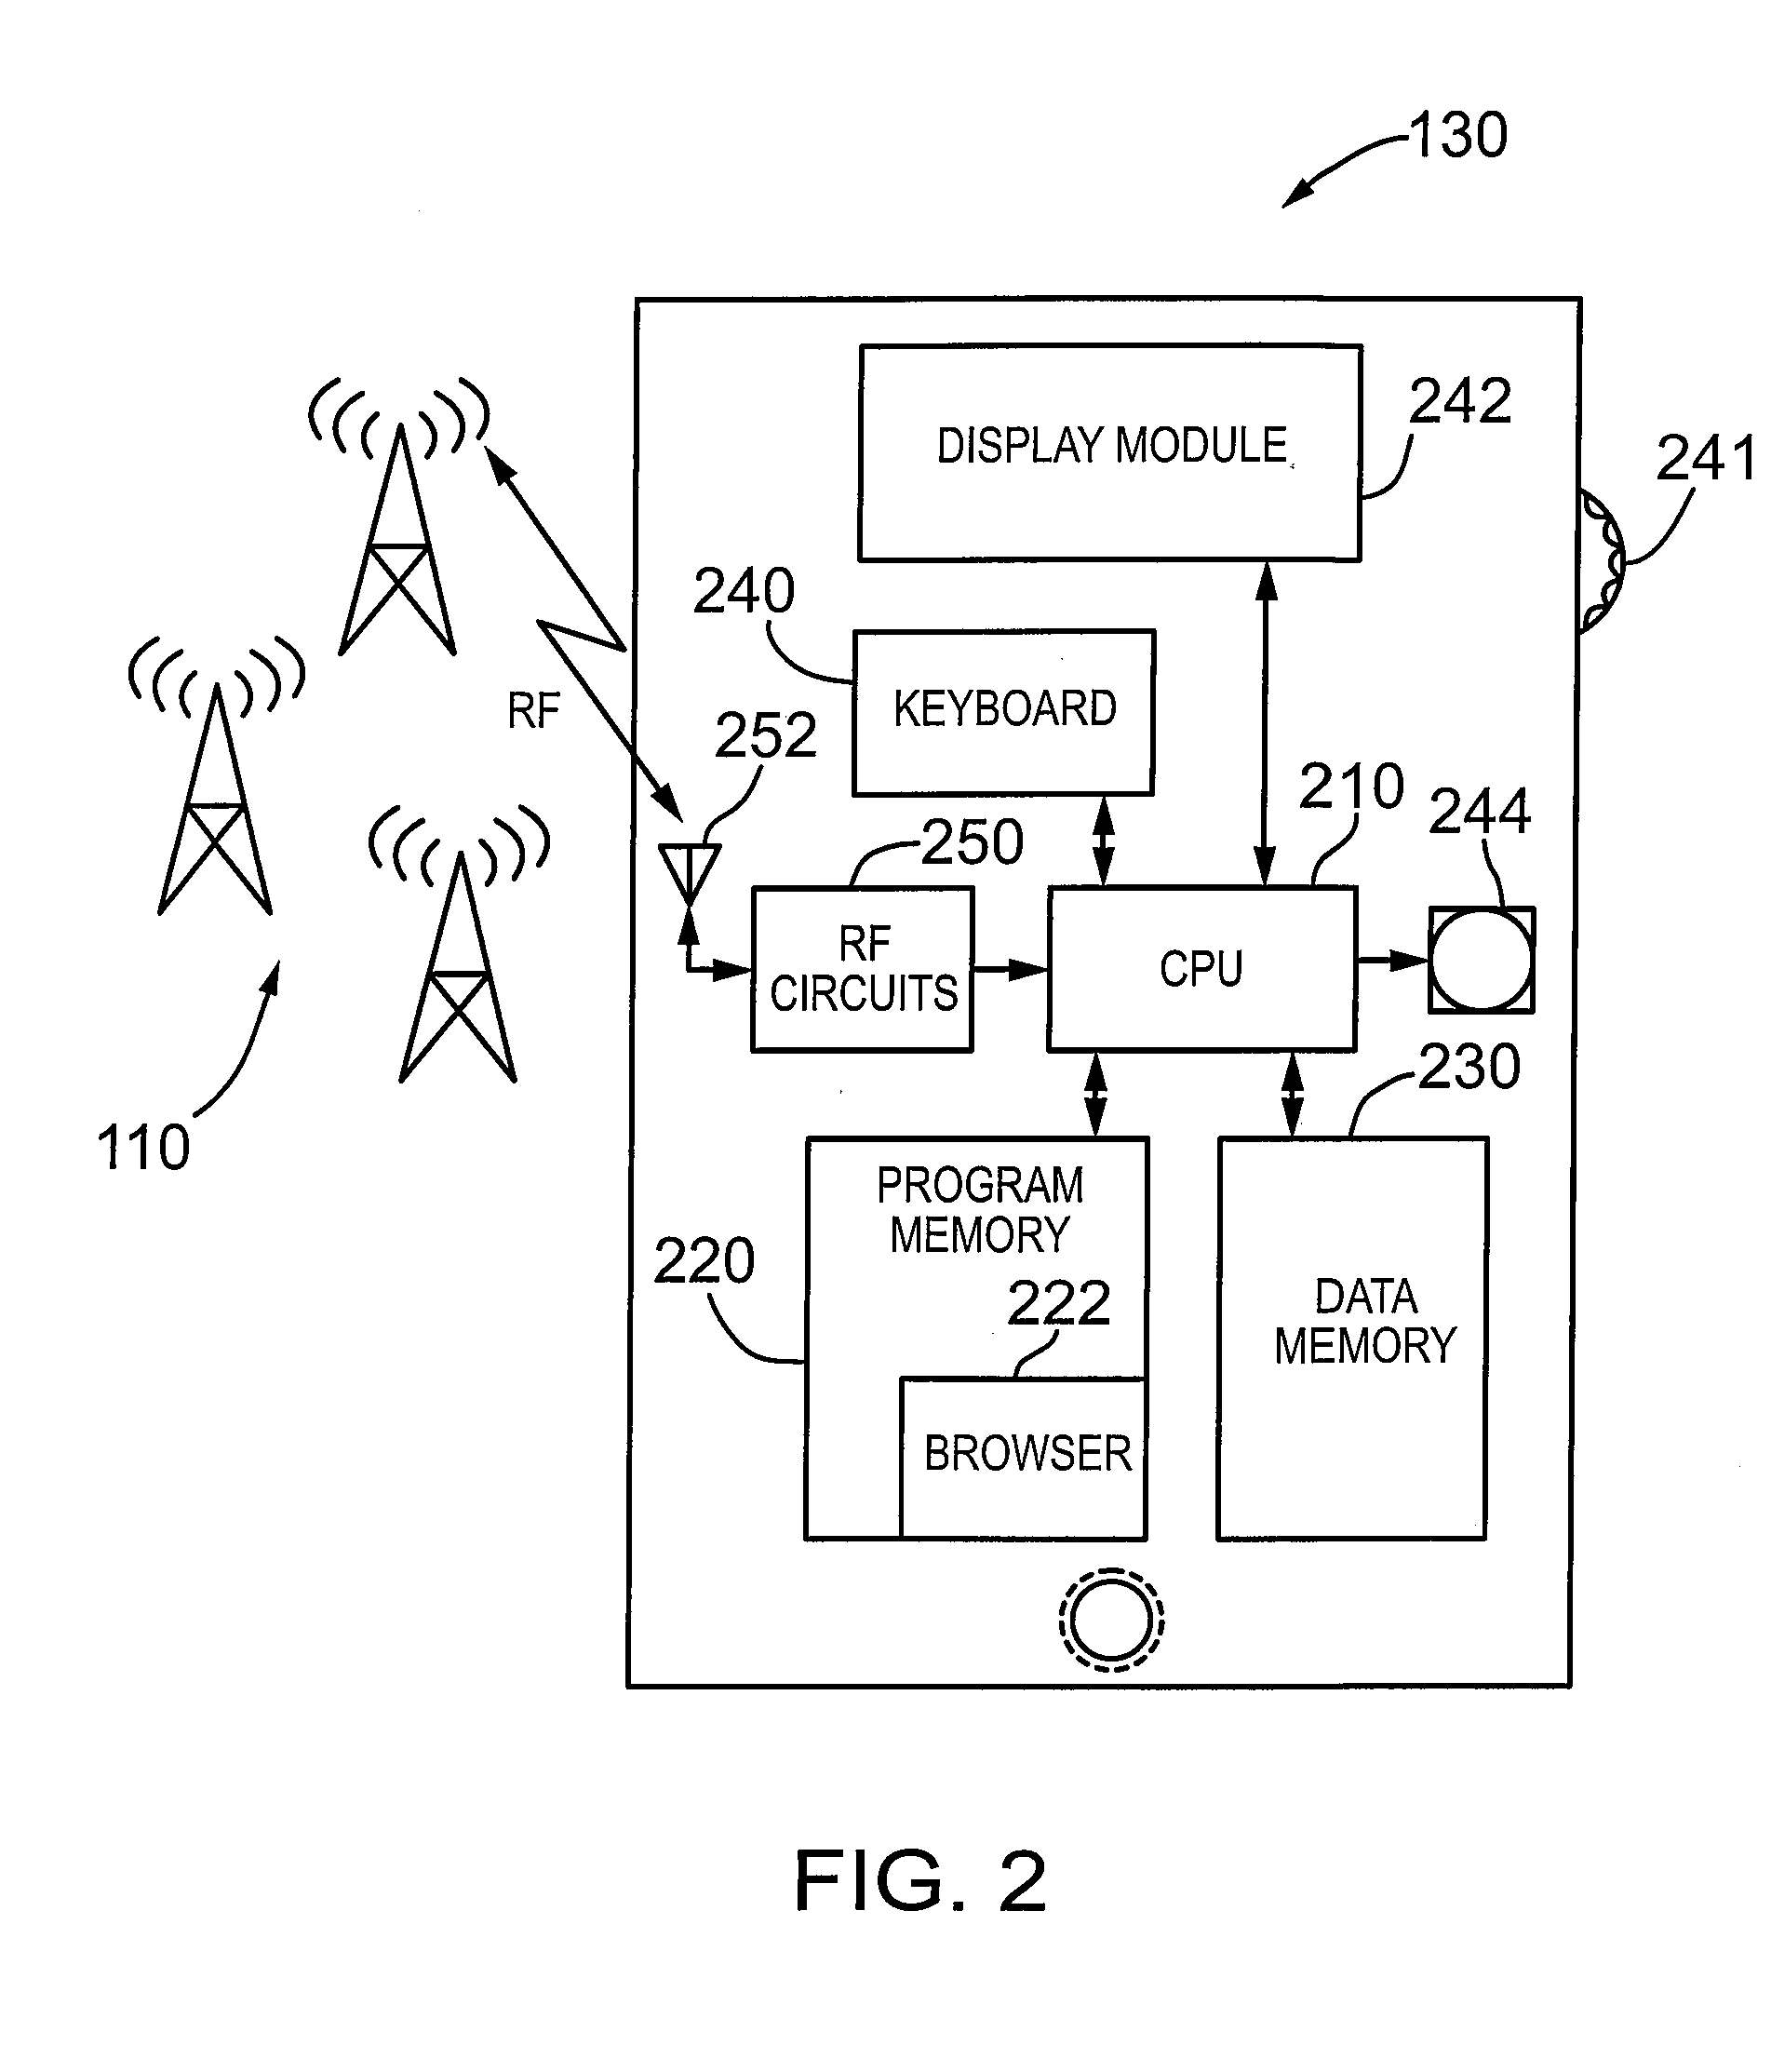 Method and apparatus for checkout transition in an e-commerce application